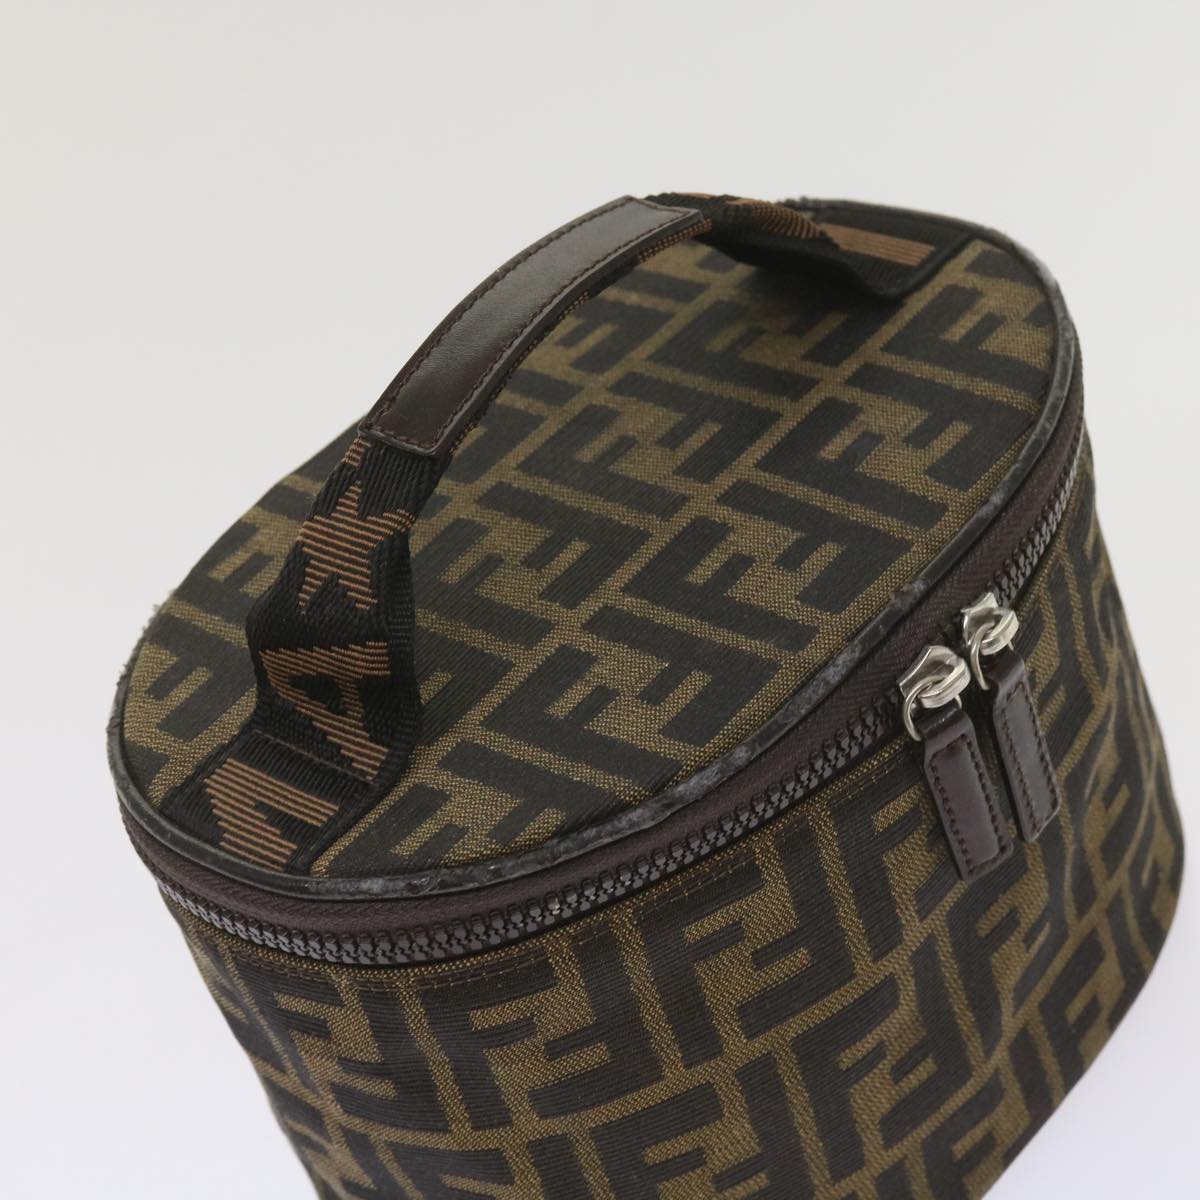 FENDI Zucca Canvas Vanity Cosmetic Pouch Brown Auth ac2711